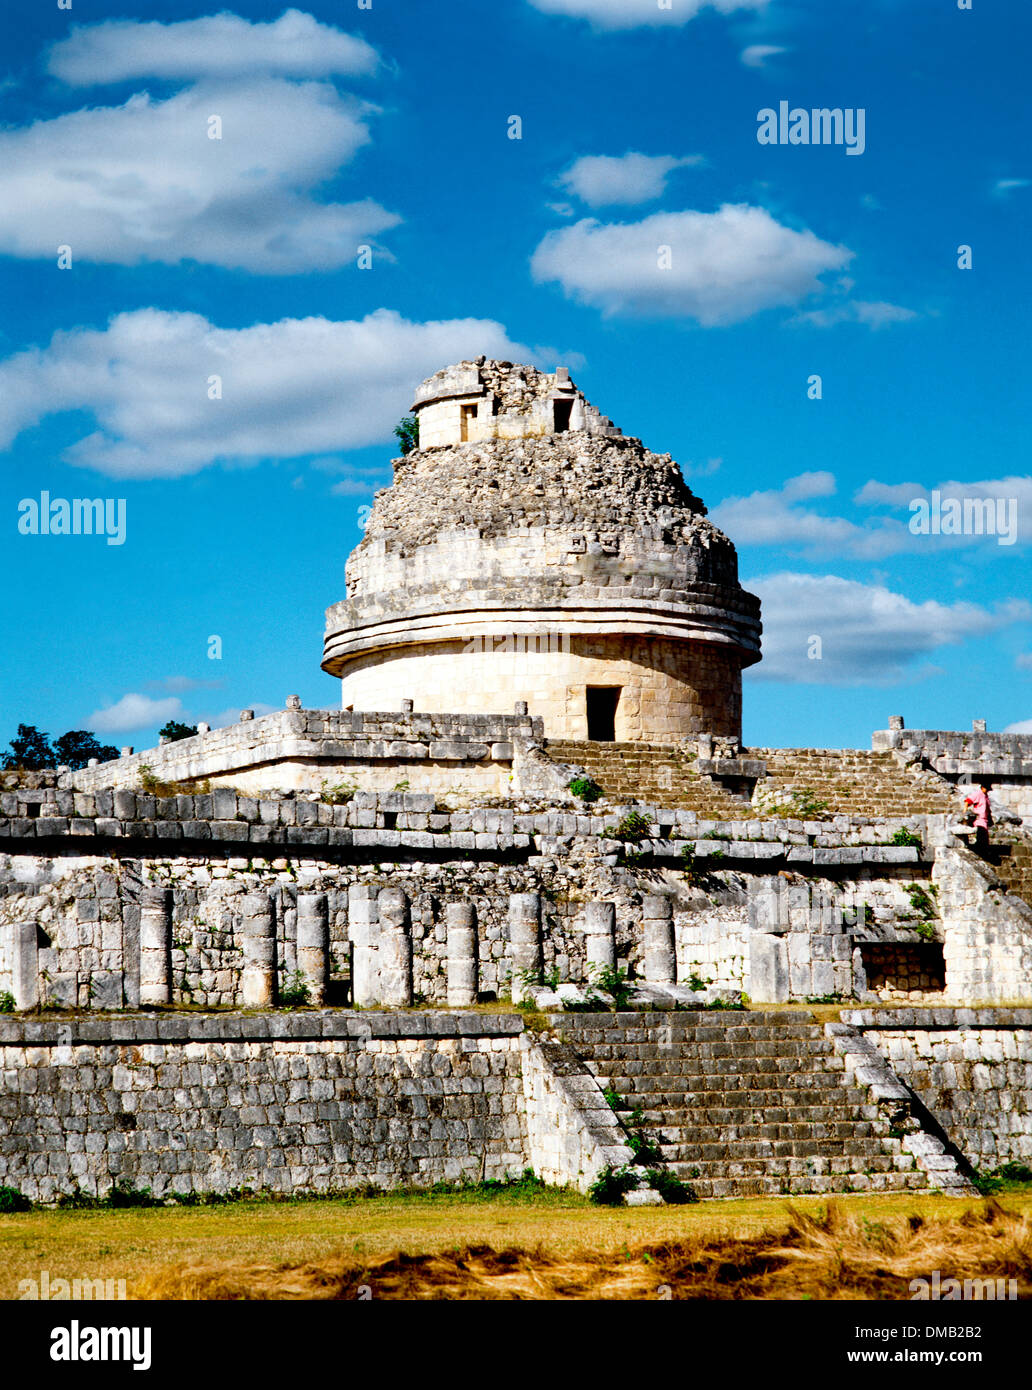 The 'El Caracol' observatory temple at the ancient ruins of Chichen Itza, Yucatan, Mexico Stock Photo